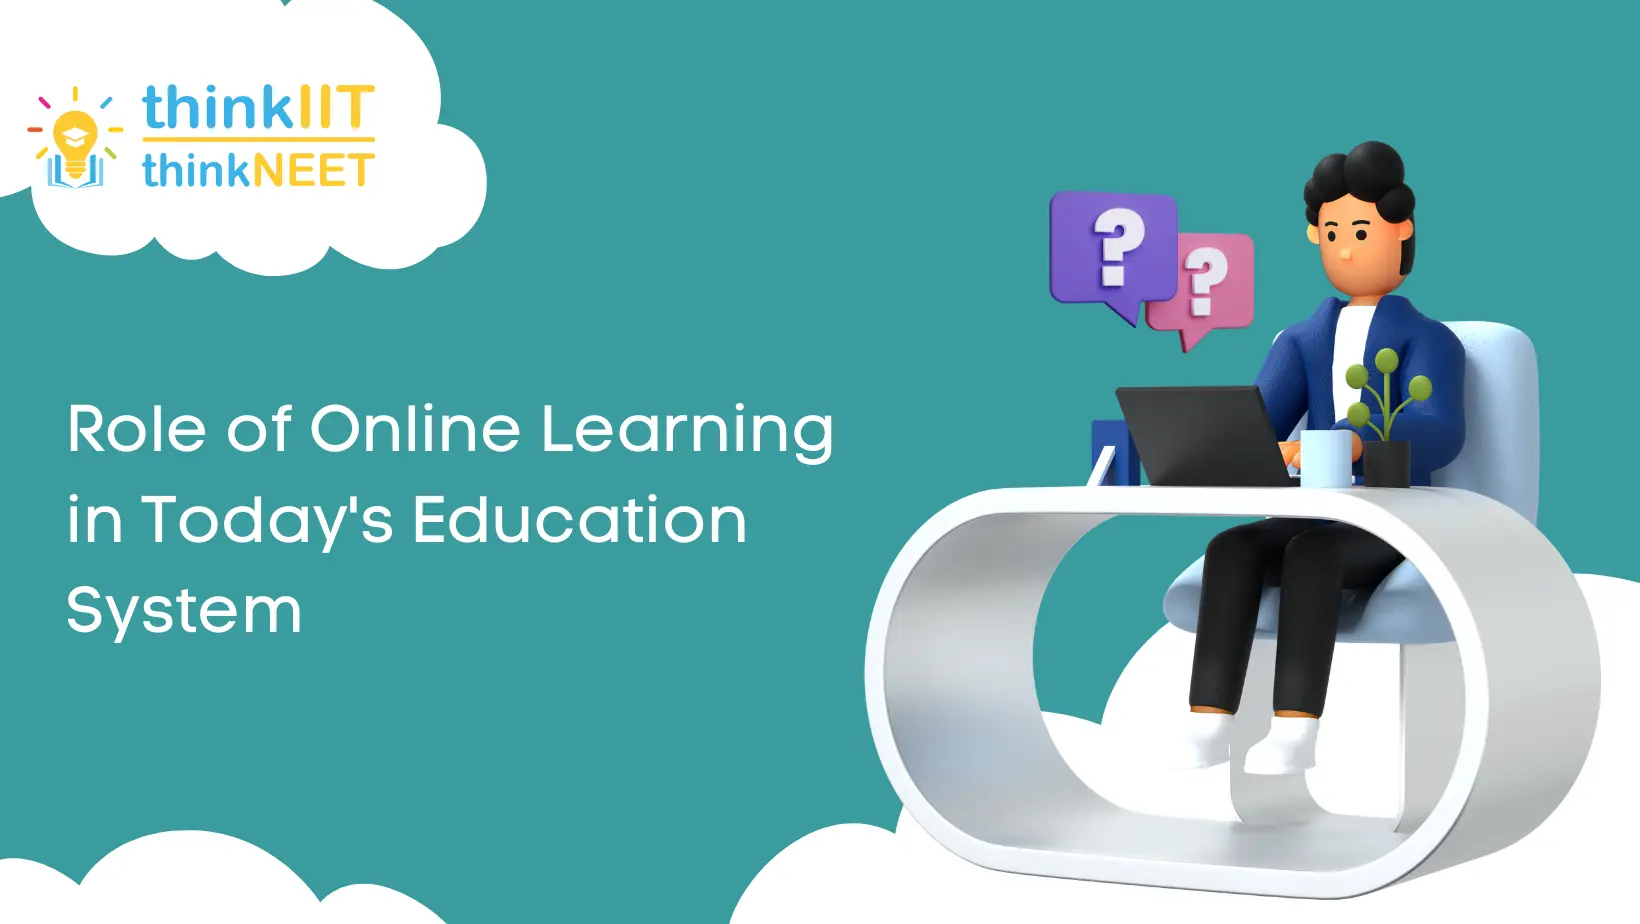 The Role of Online Learning in Today's Education System